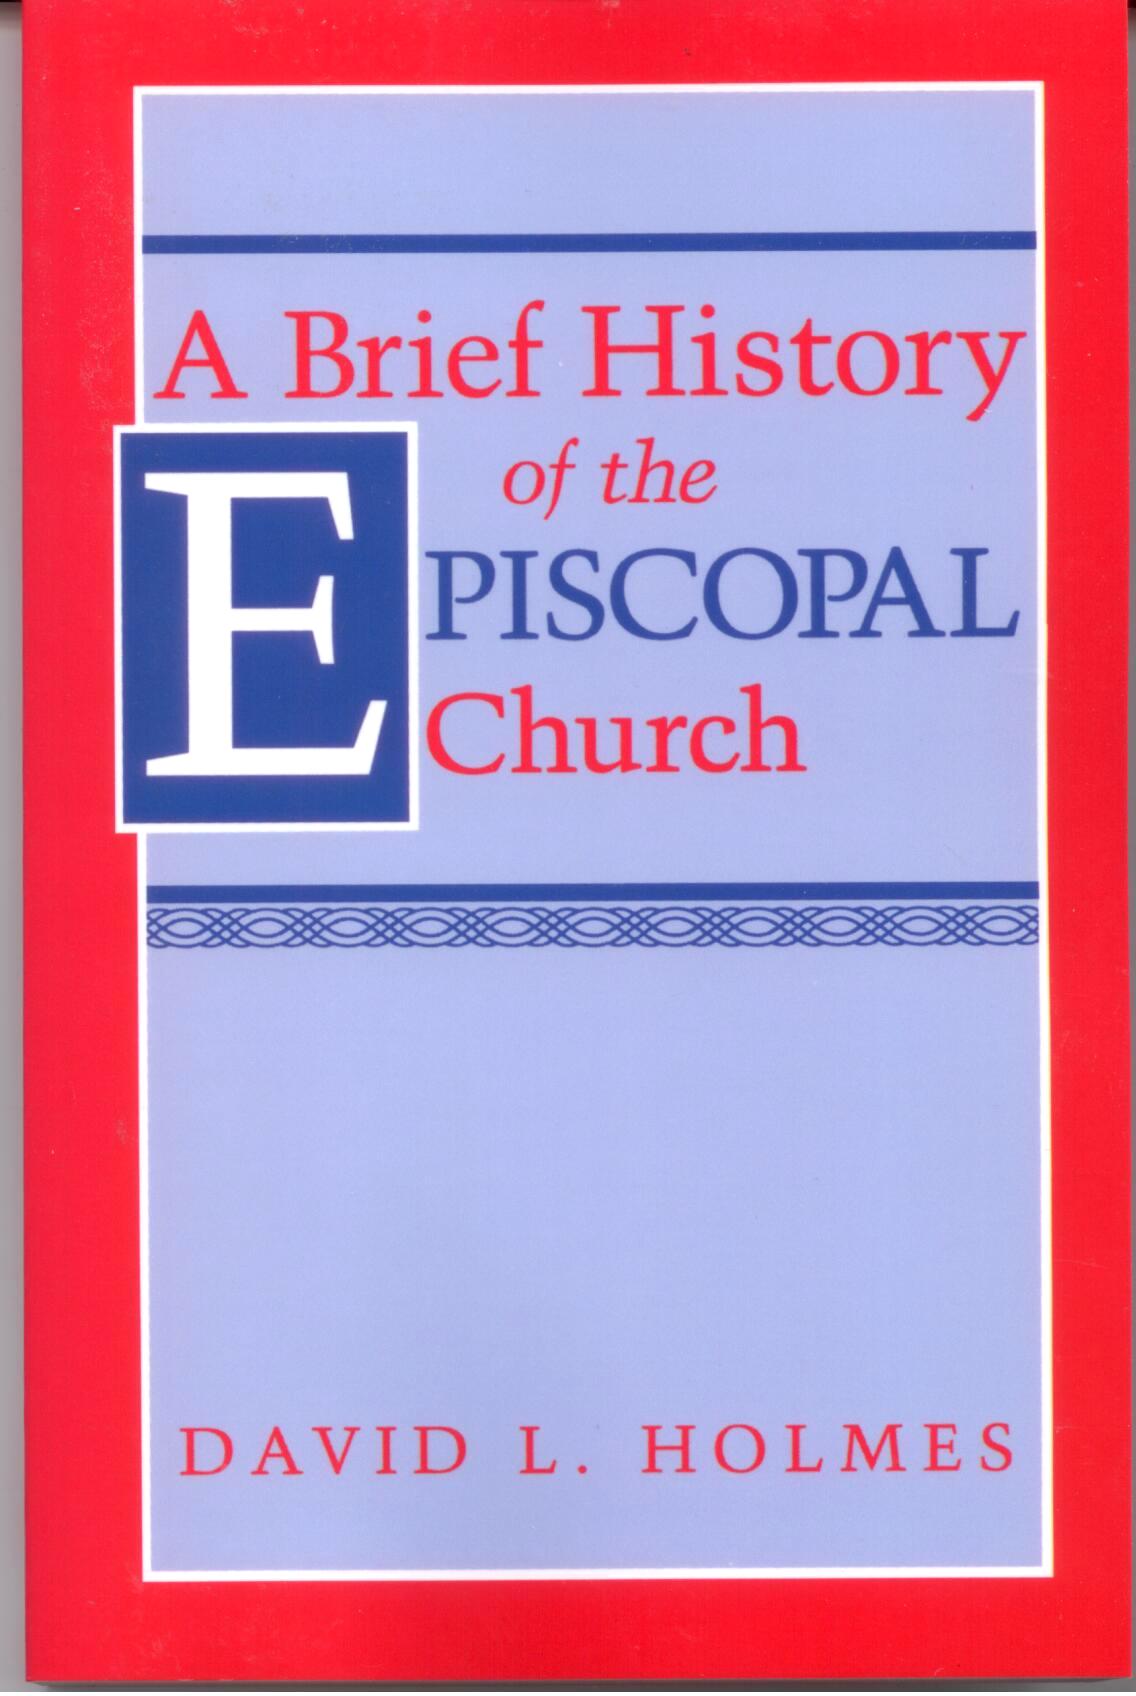 A Brief History of the Episcopal Church by David L.Holmes 108-9781563380600